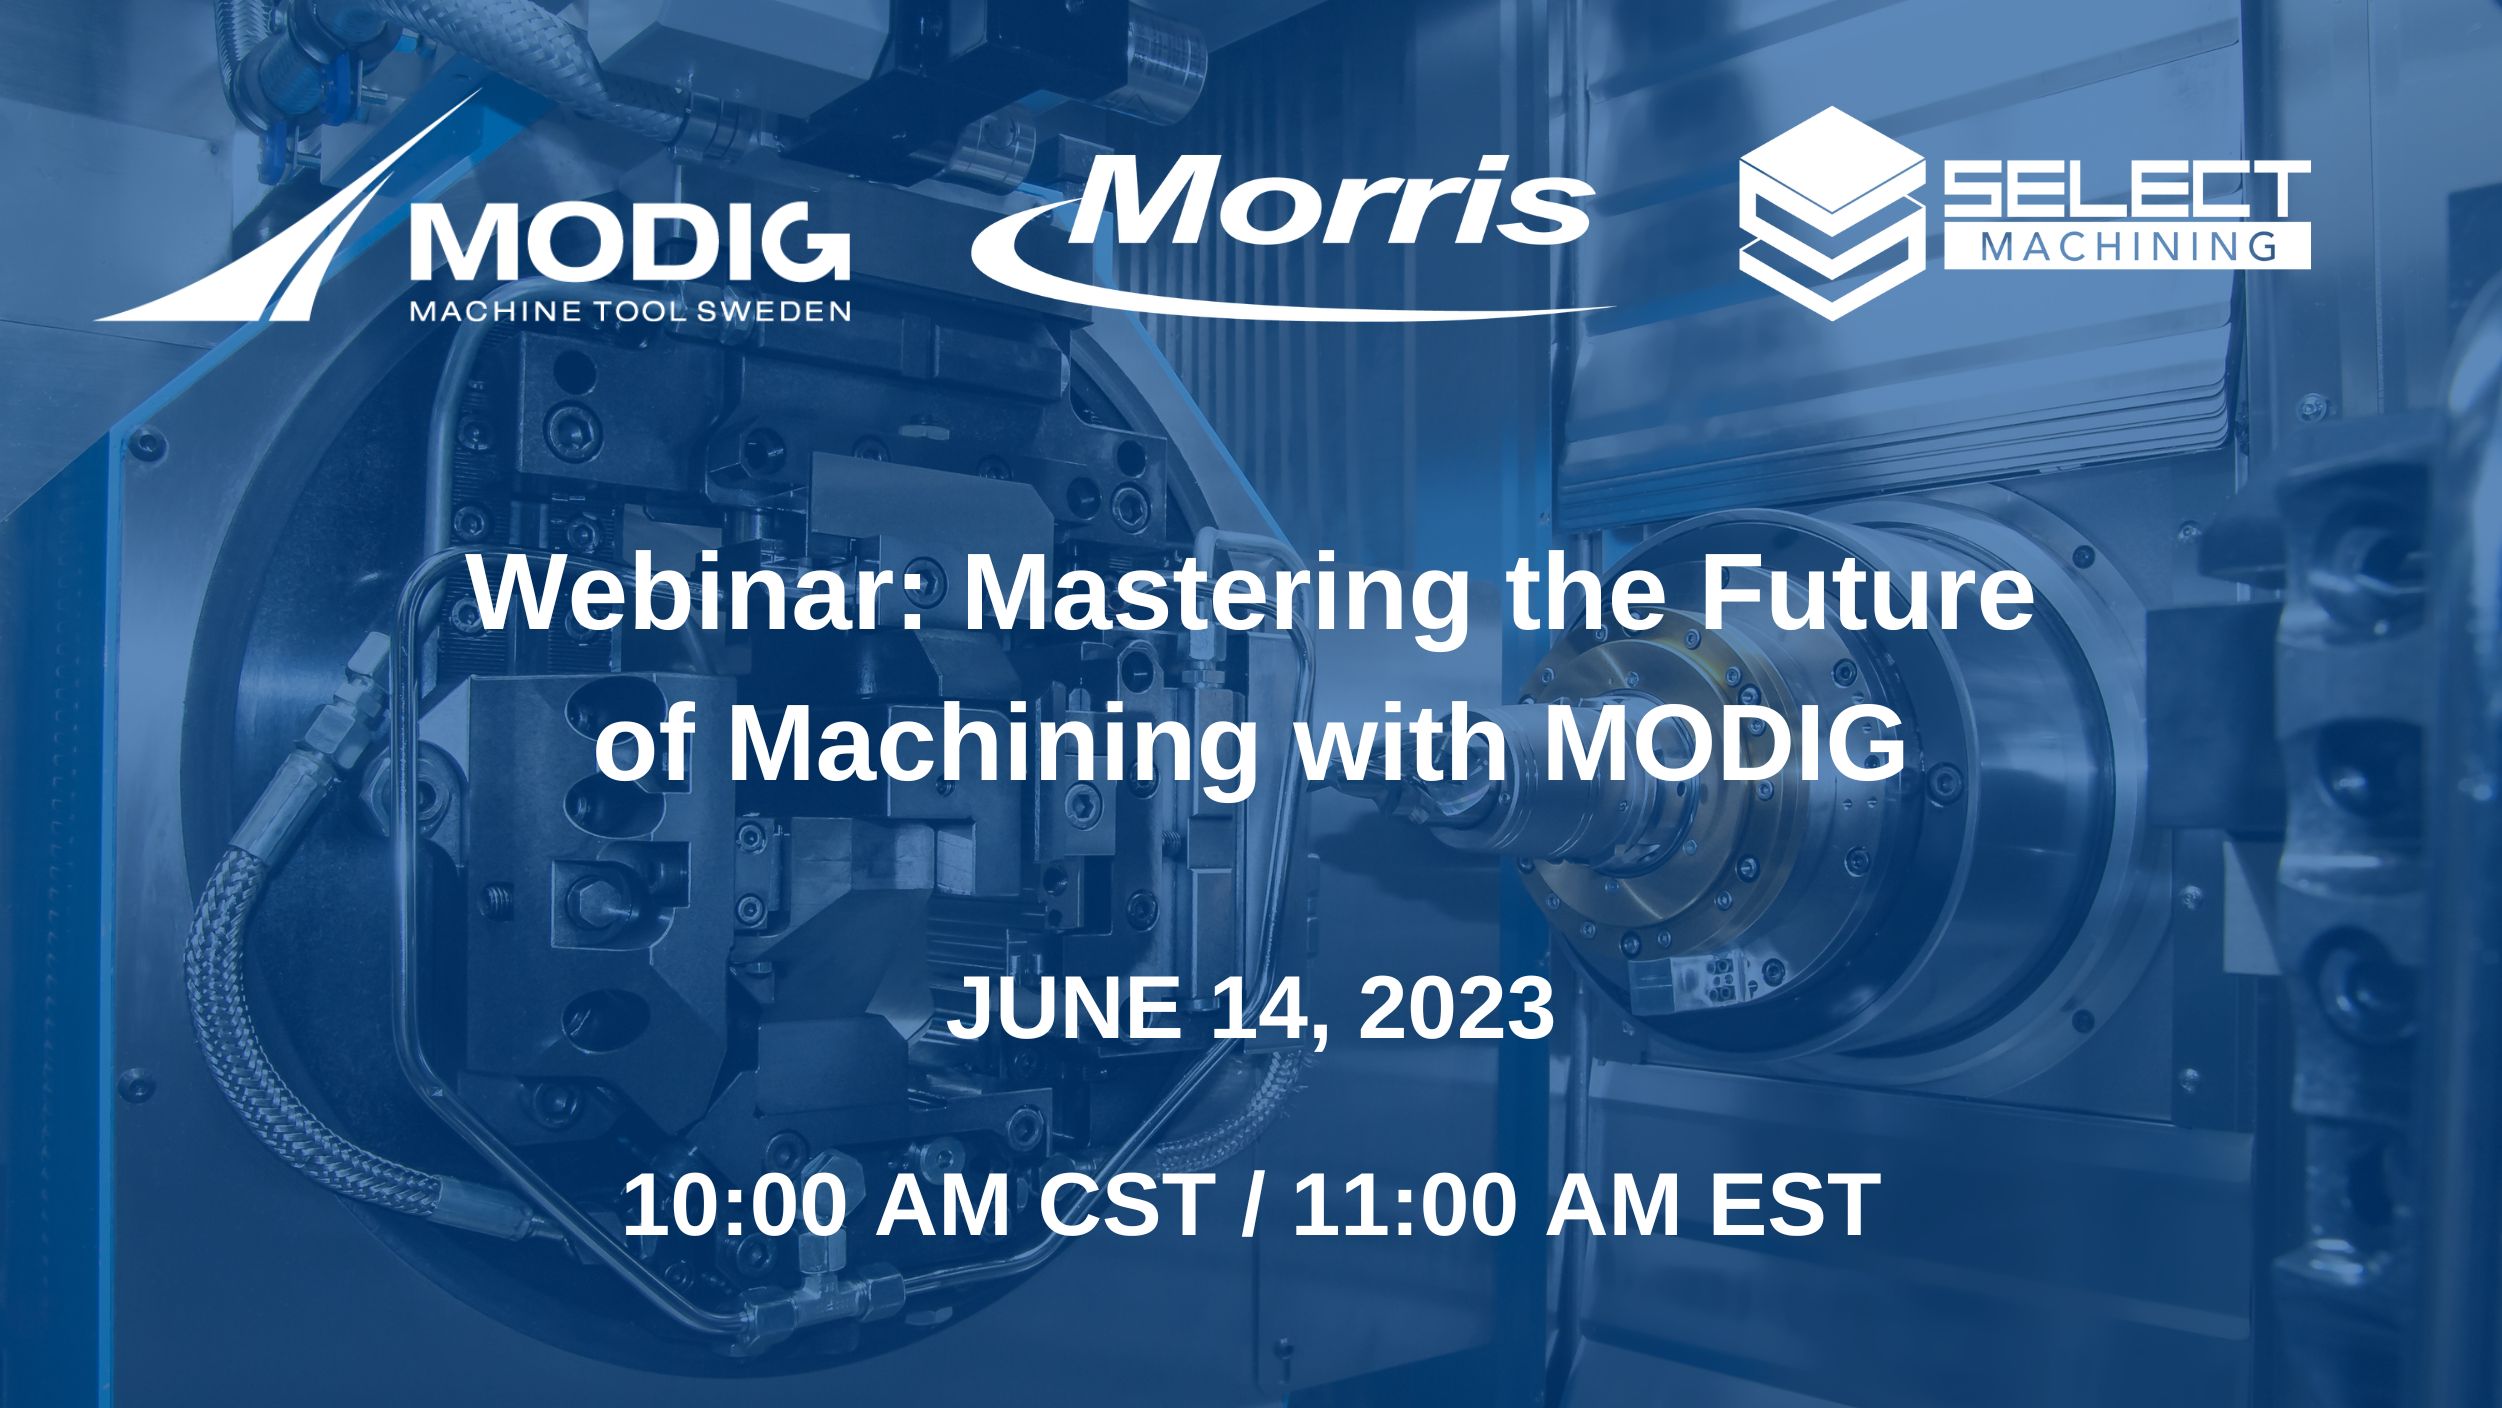 Modig Machine Tool, Morris, and Select Machining invite you
to join us on a live webinar June 14th.